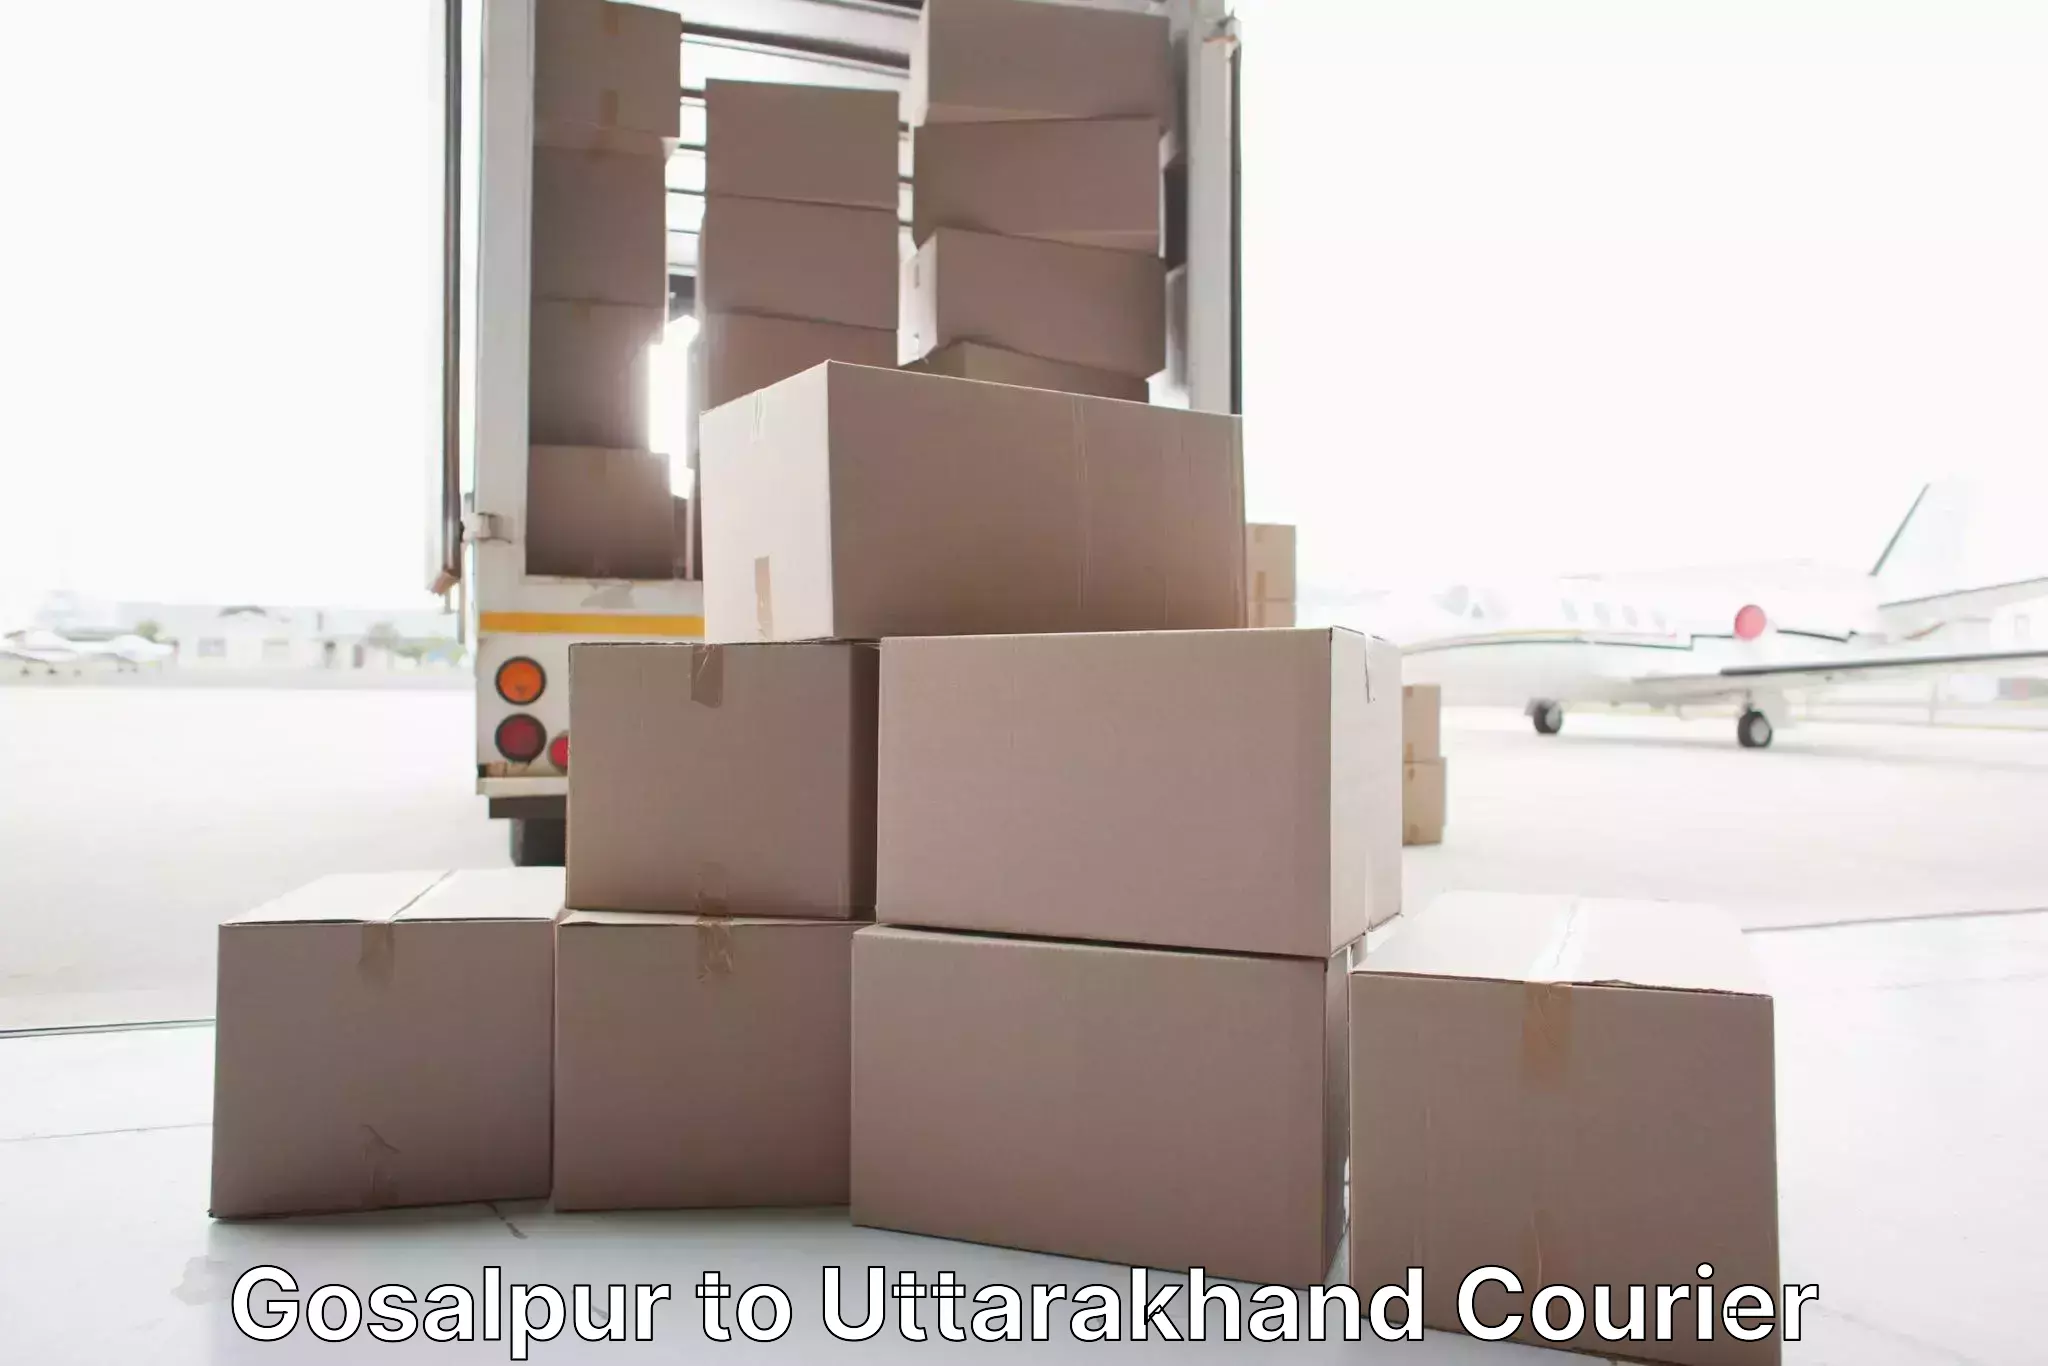 Specialized furniture moving Gosalpur to Champawat